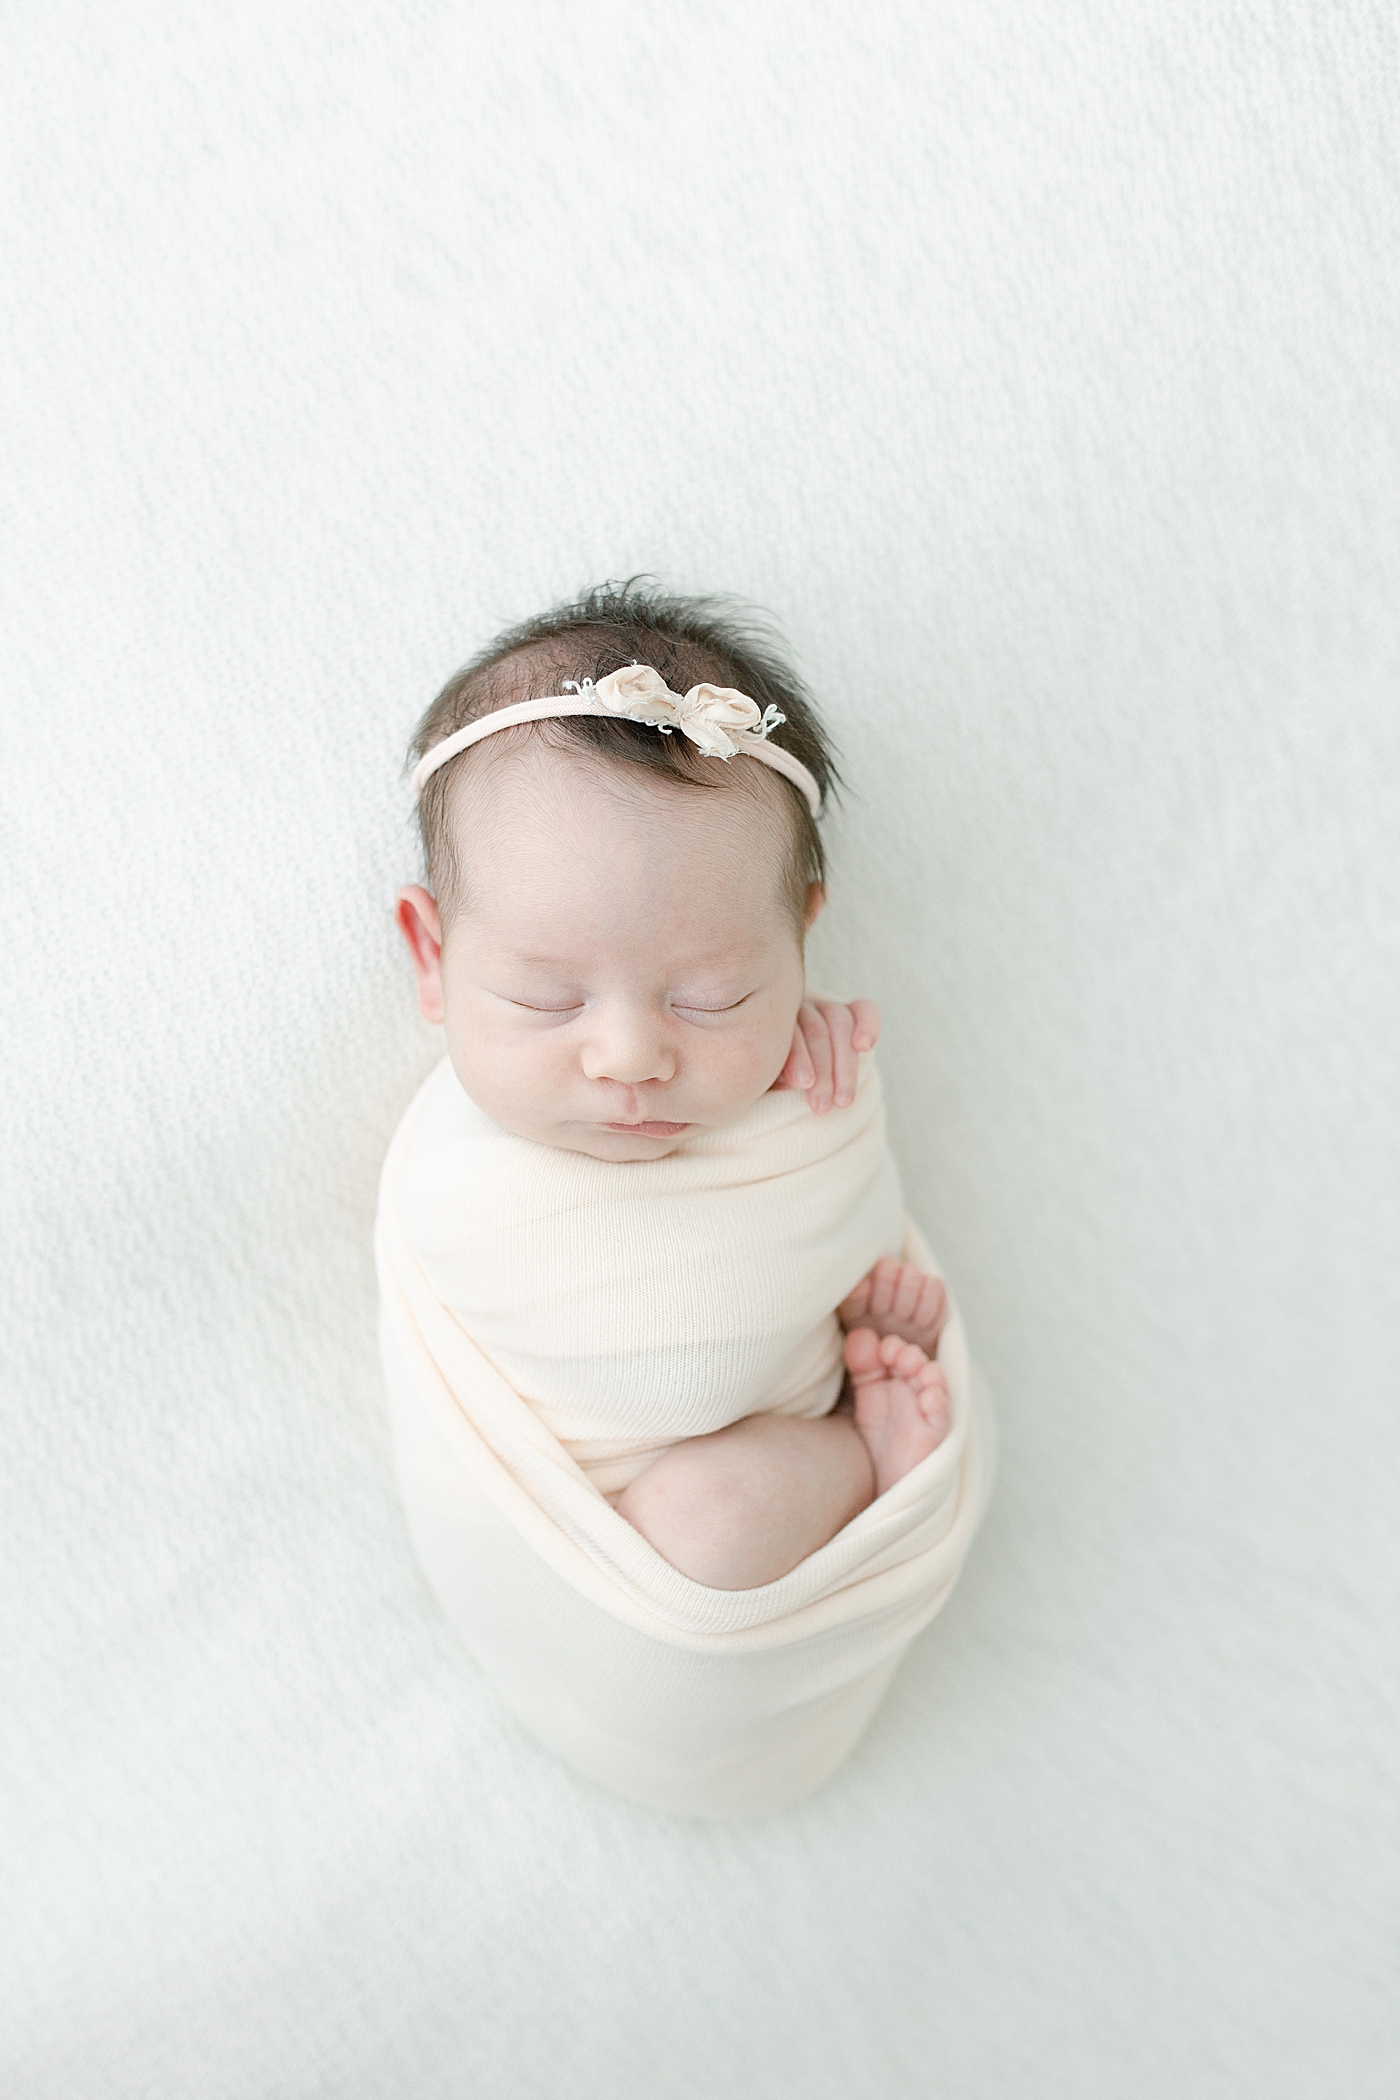 Baby girl swaddled with feet and hands peeking out during newborn session. Photo by Little Sunshine Photography